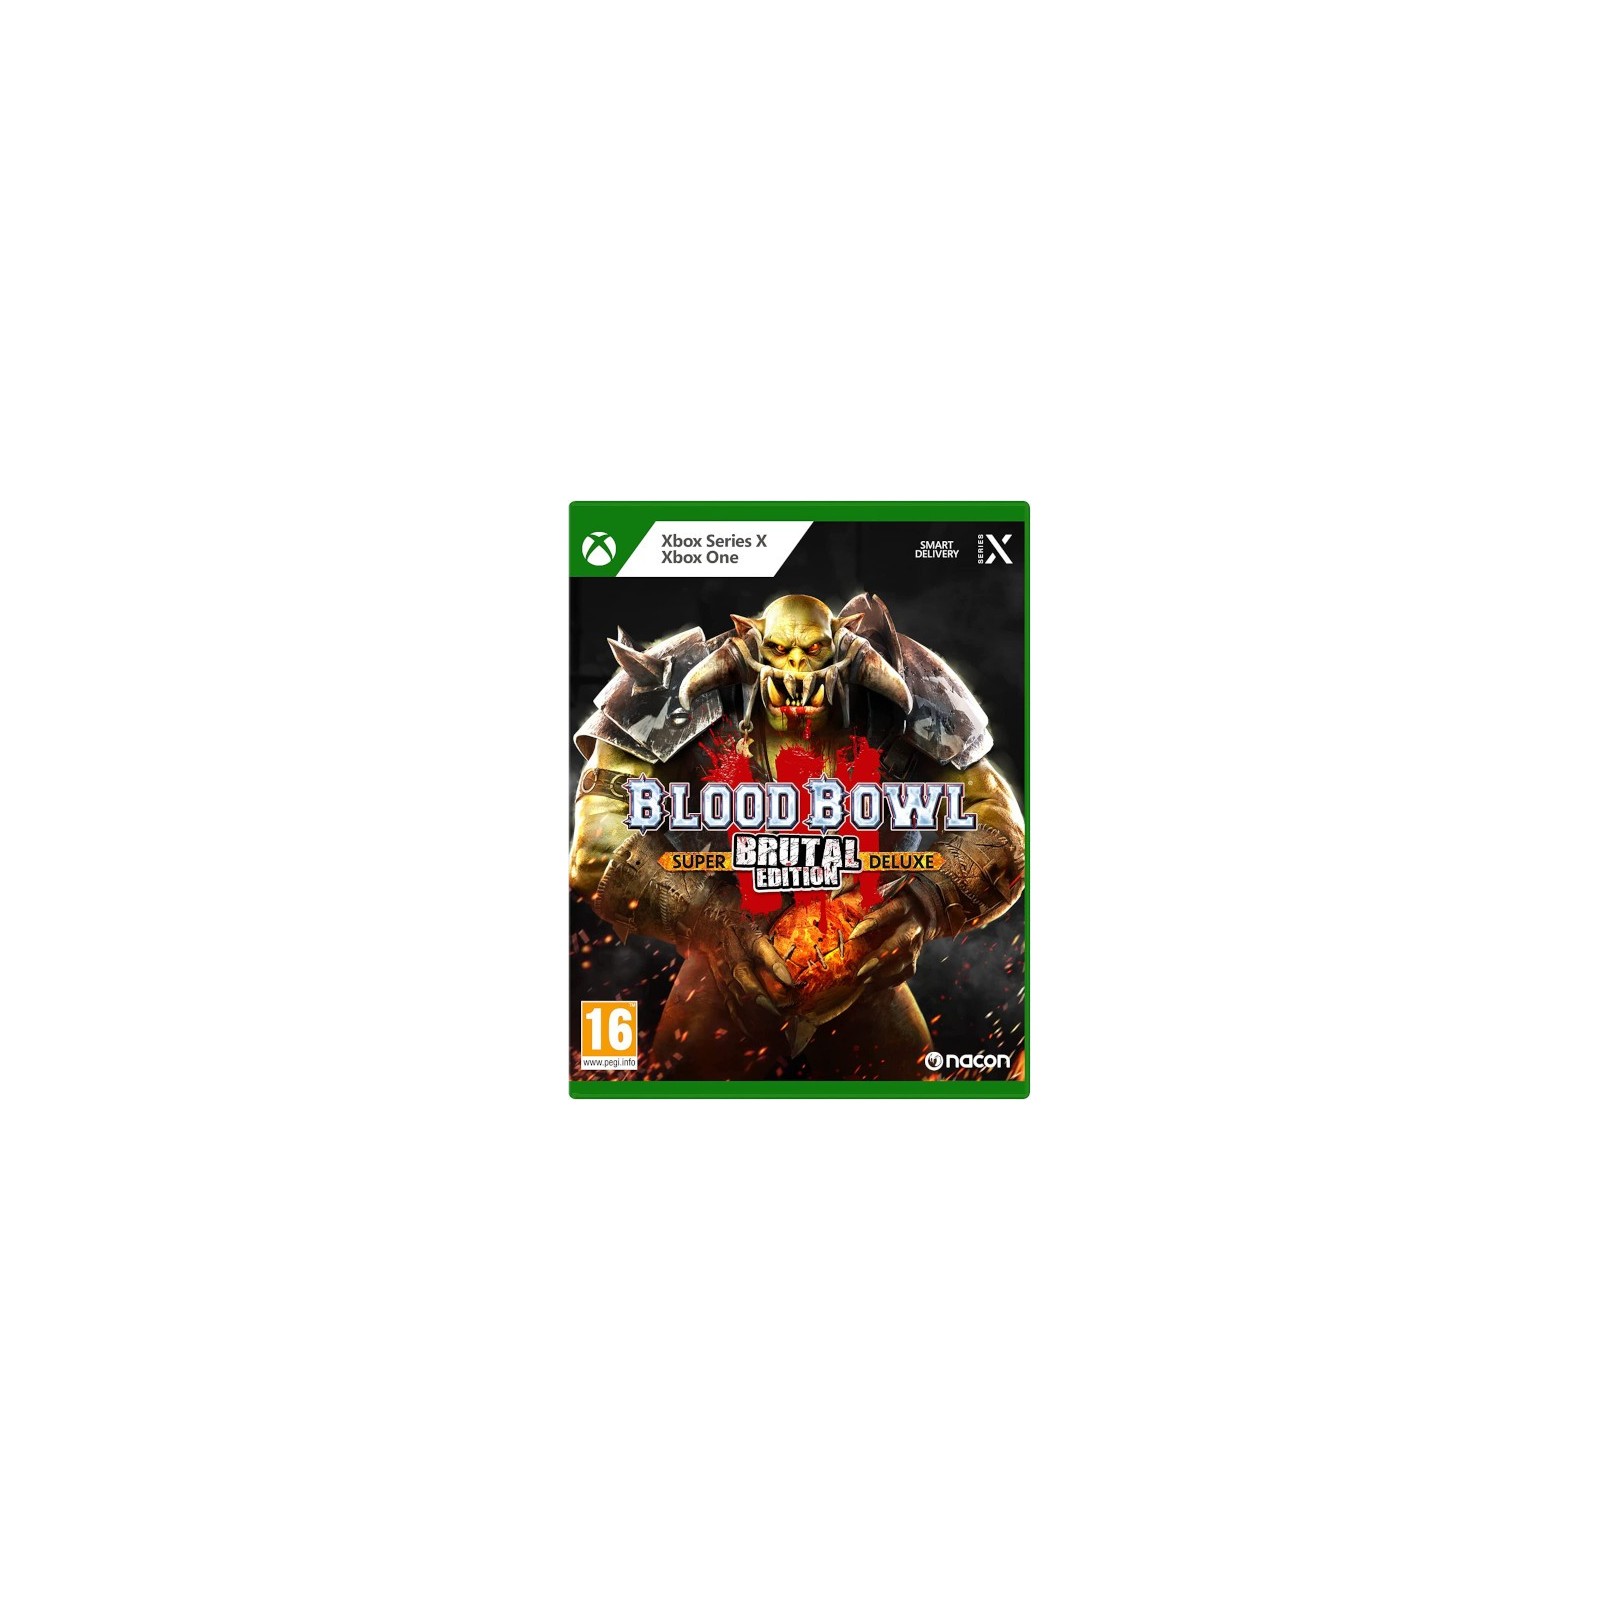 BLOOD BOWL III - SUPER BRUTAL EDITION DELUXE -(XBONE)